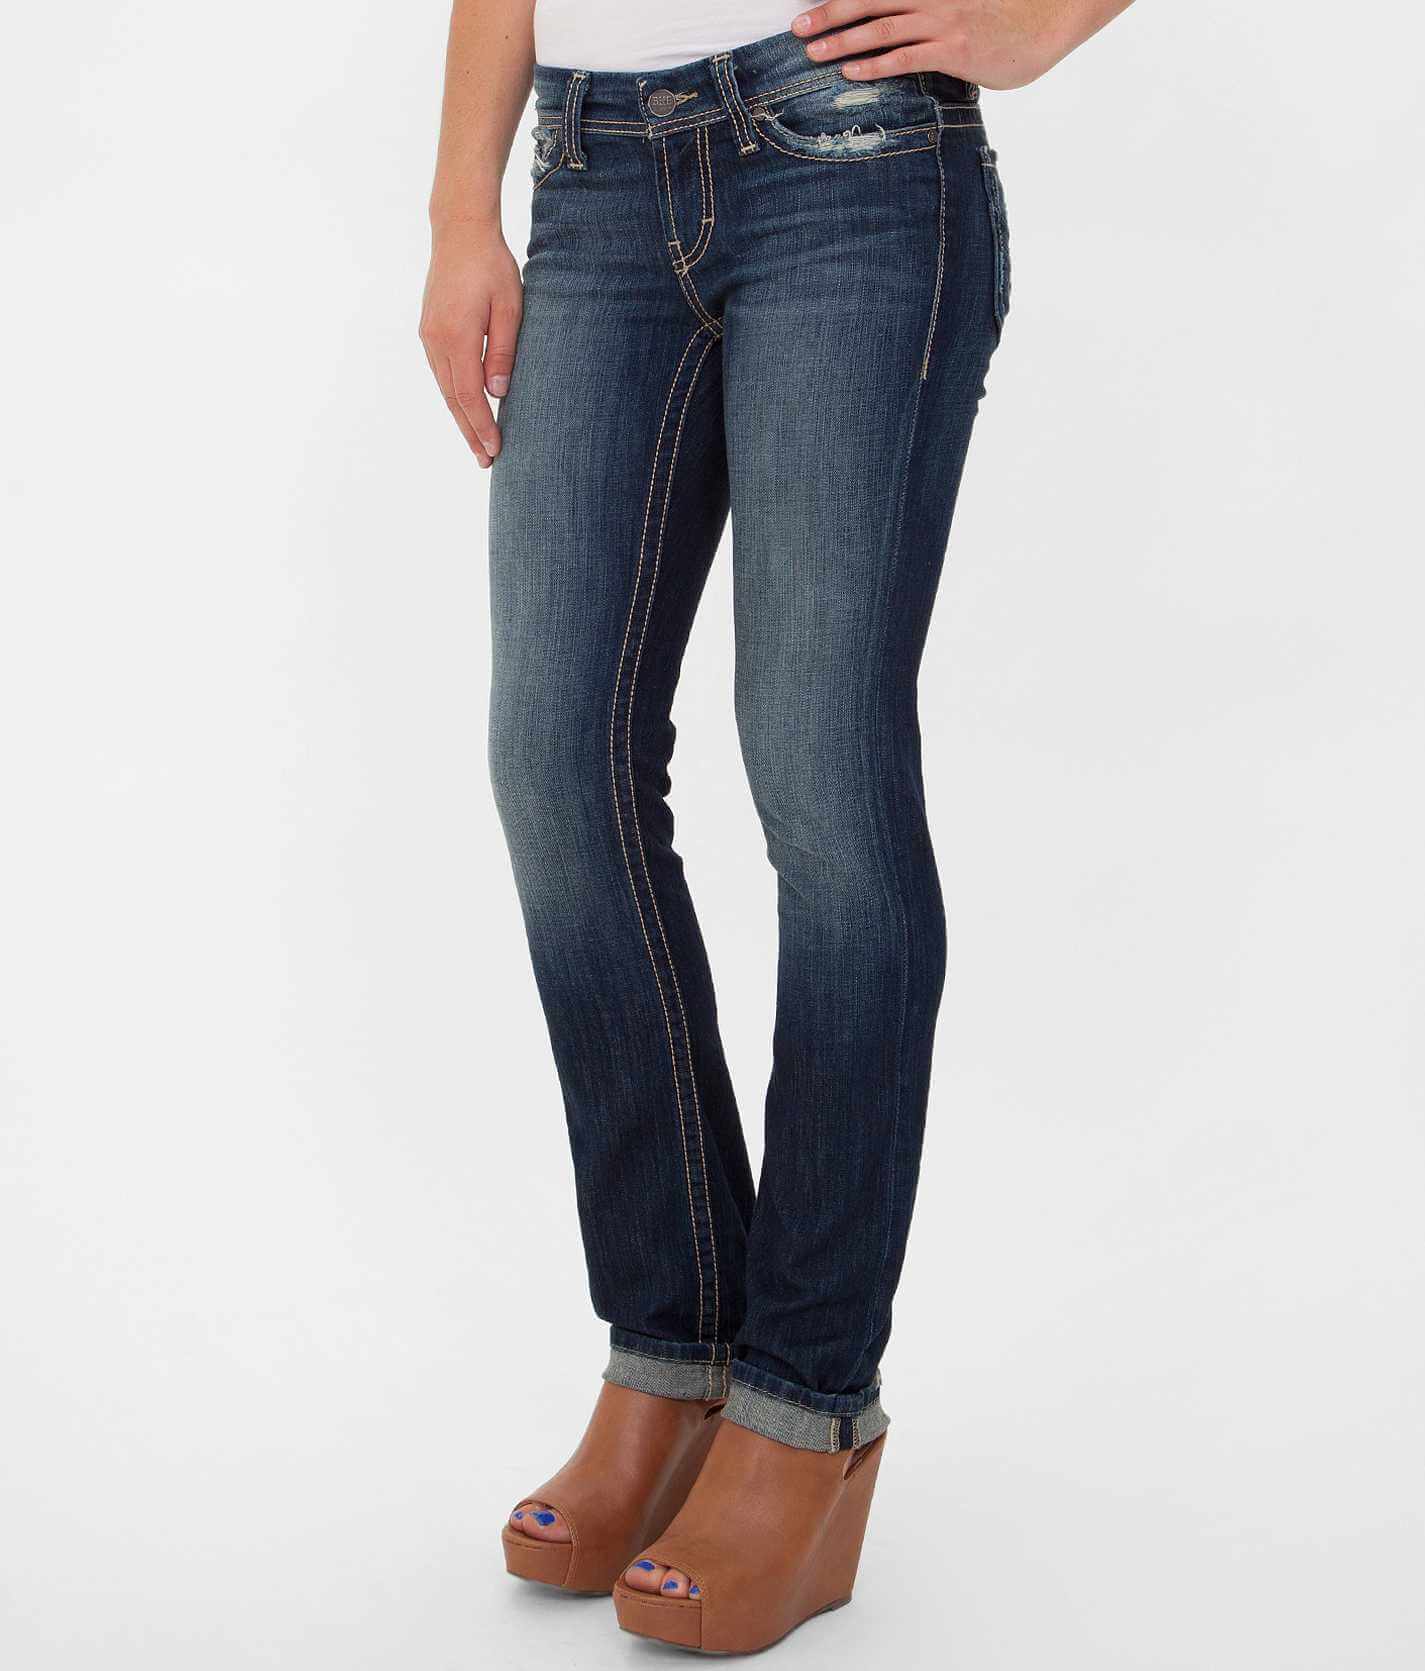 buckle womens jeans